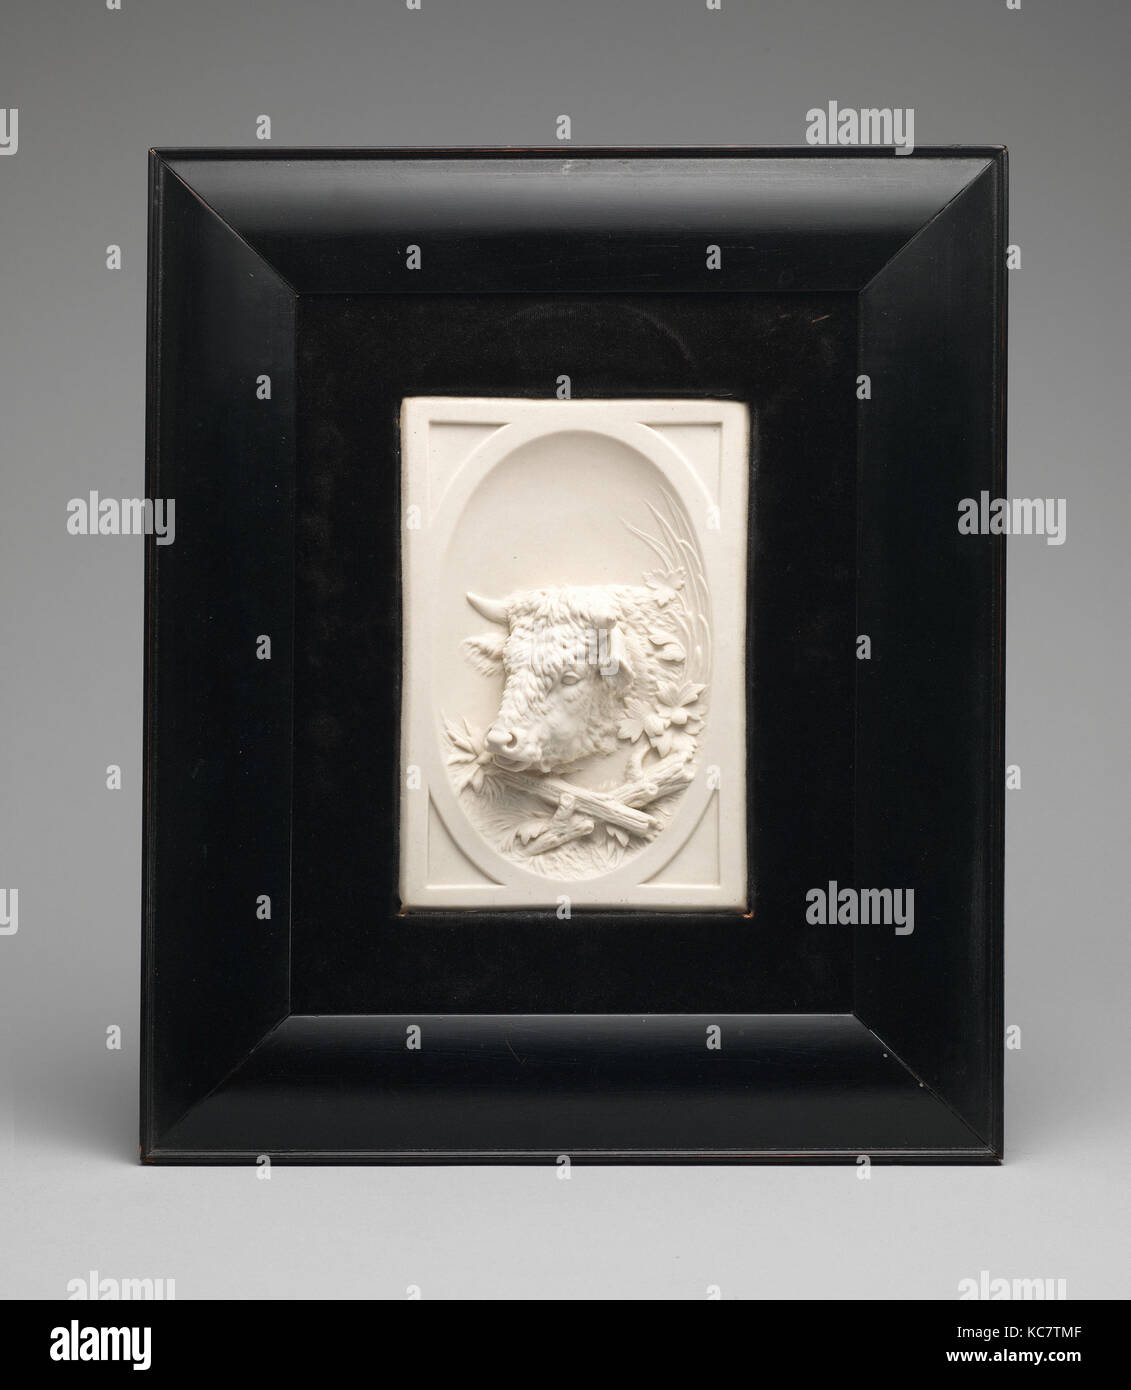 Plaque, ca. 1885–86, Made in Baltimore, Maryland, United States, American, Parian porcelain, 9 x 6 in. (22.9 x 15.2 cm), Ceramic Stock Photo